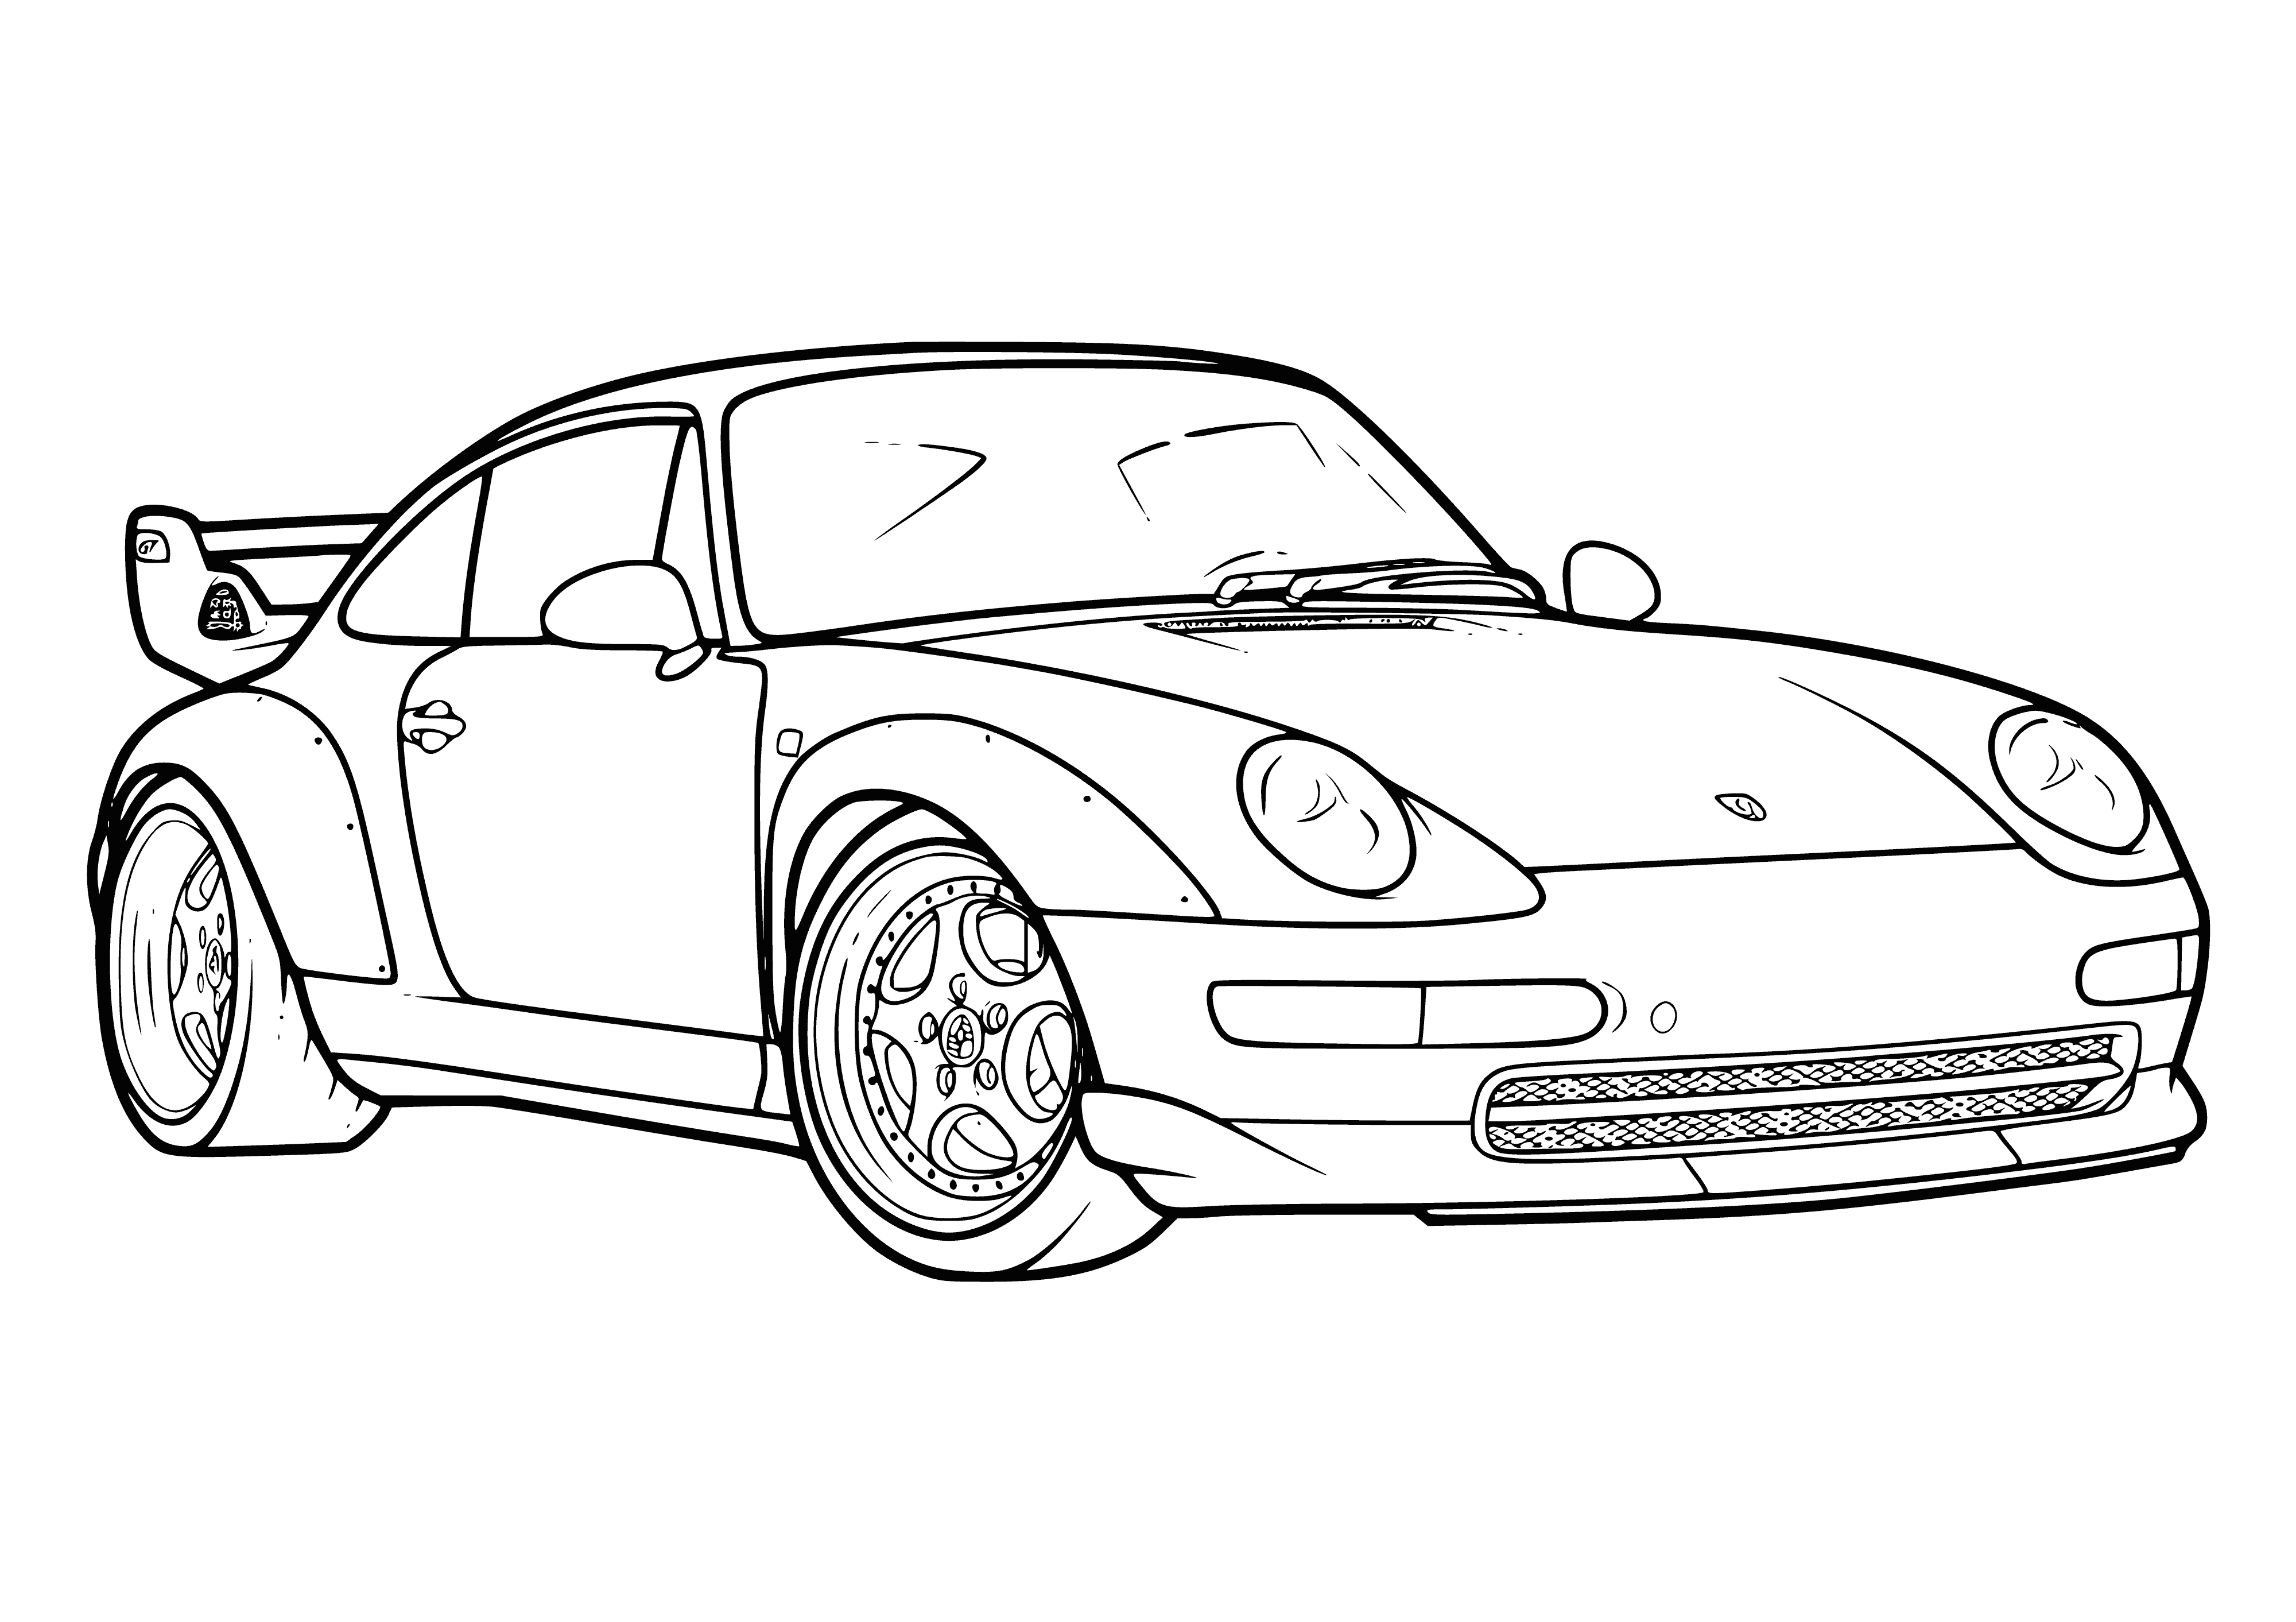 coloring page: Black & white Porsche car coloring page. Features curved lines & sleek design. Logo in center. Fun for all ages!